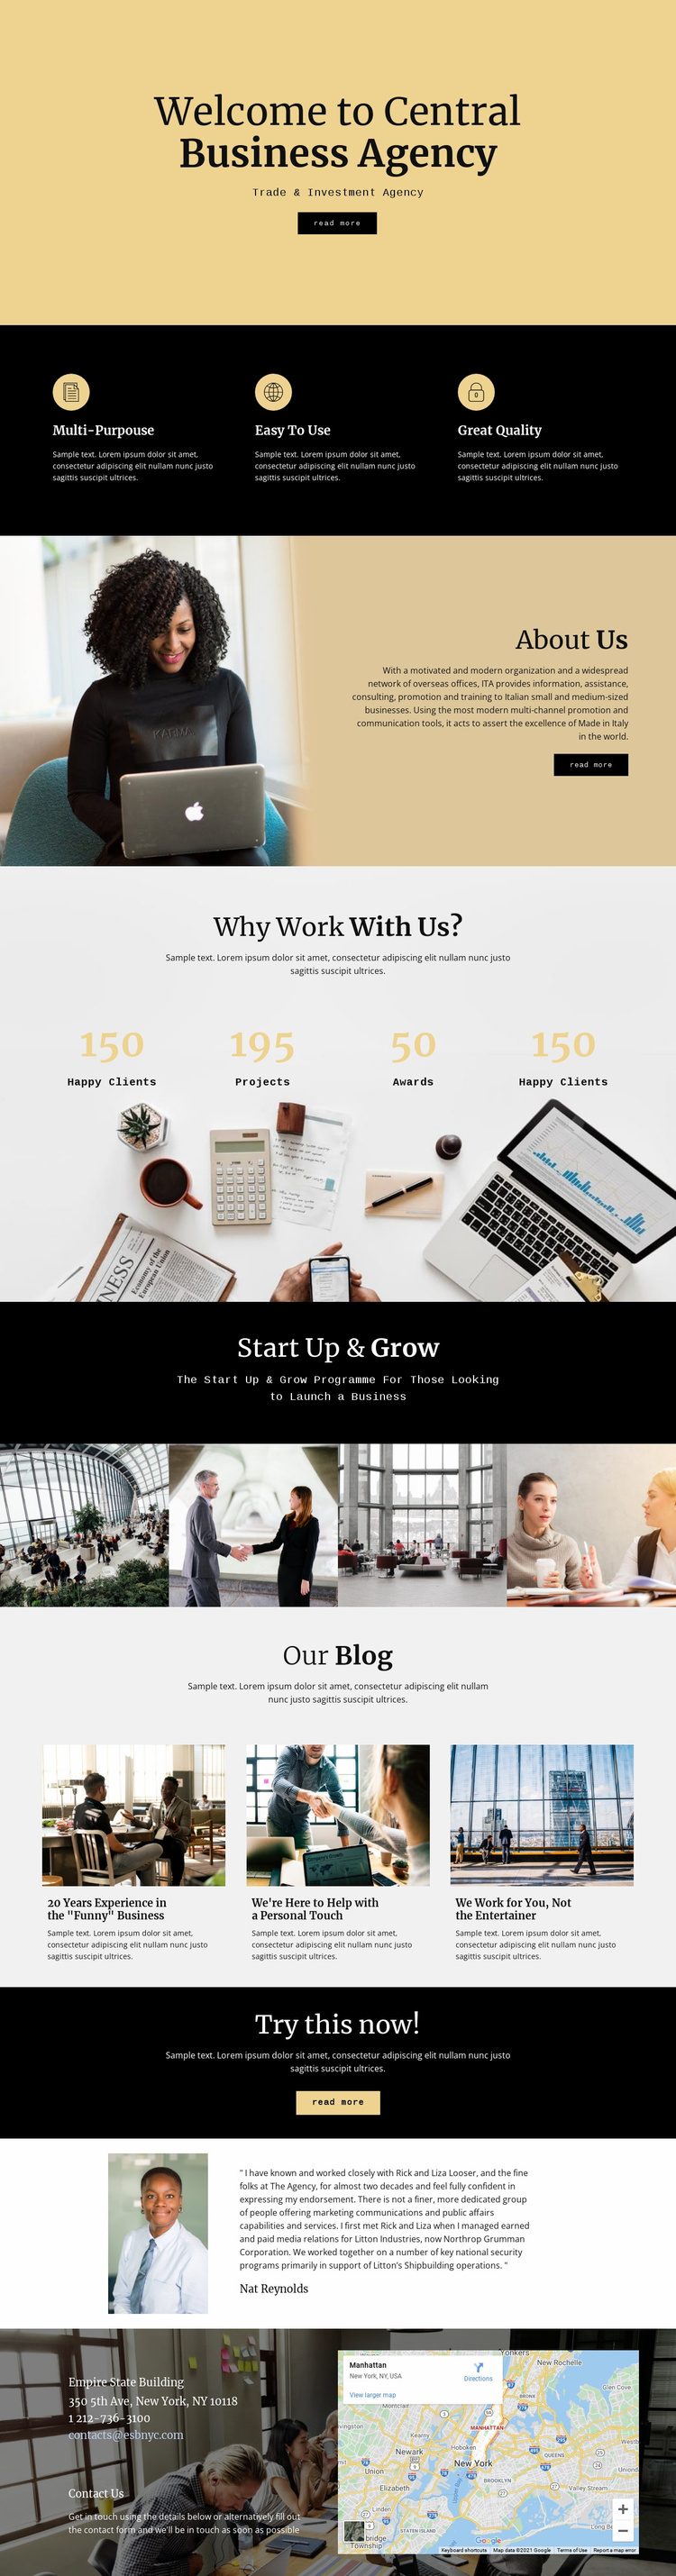 Central digital agency Landing Page